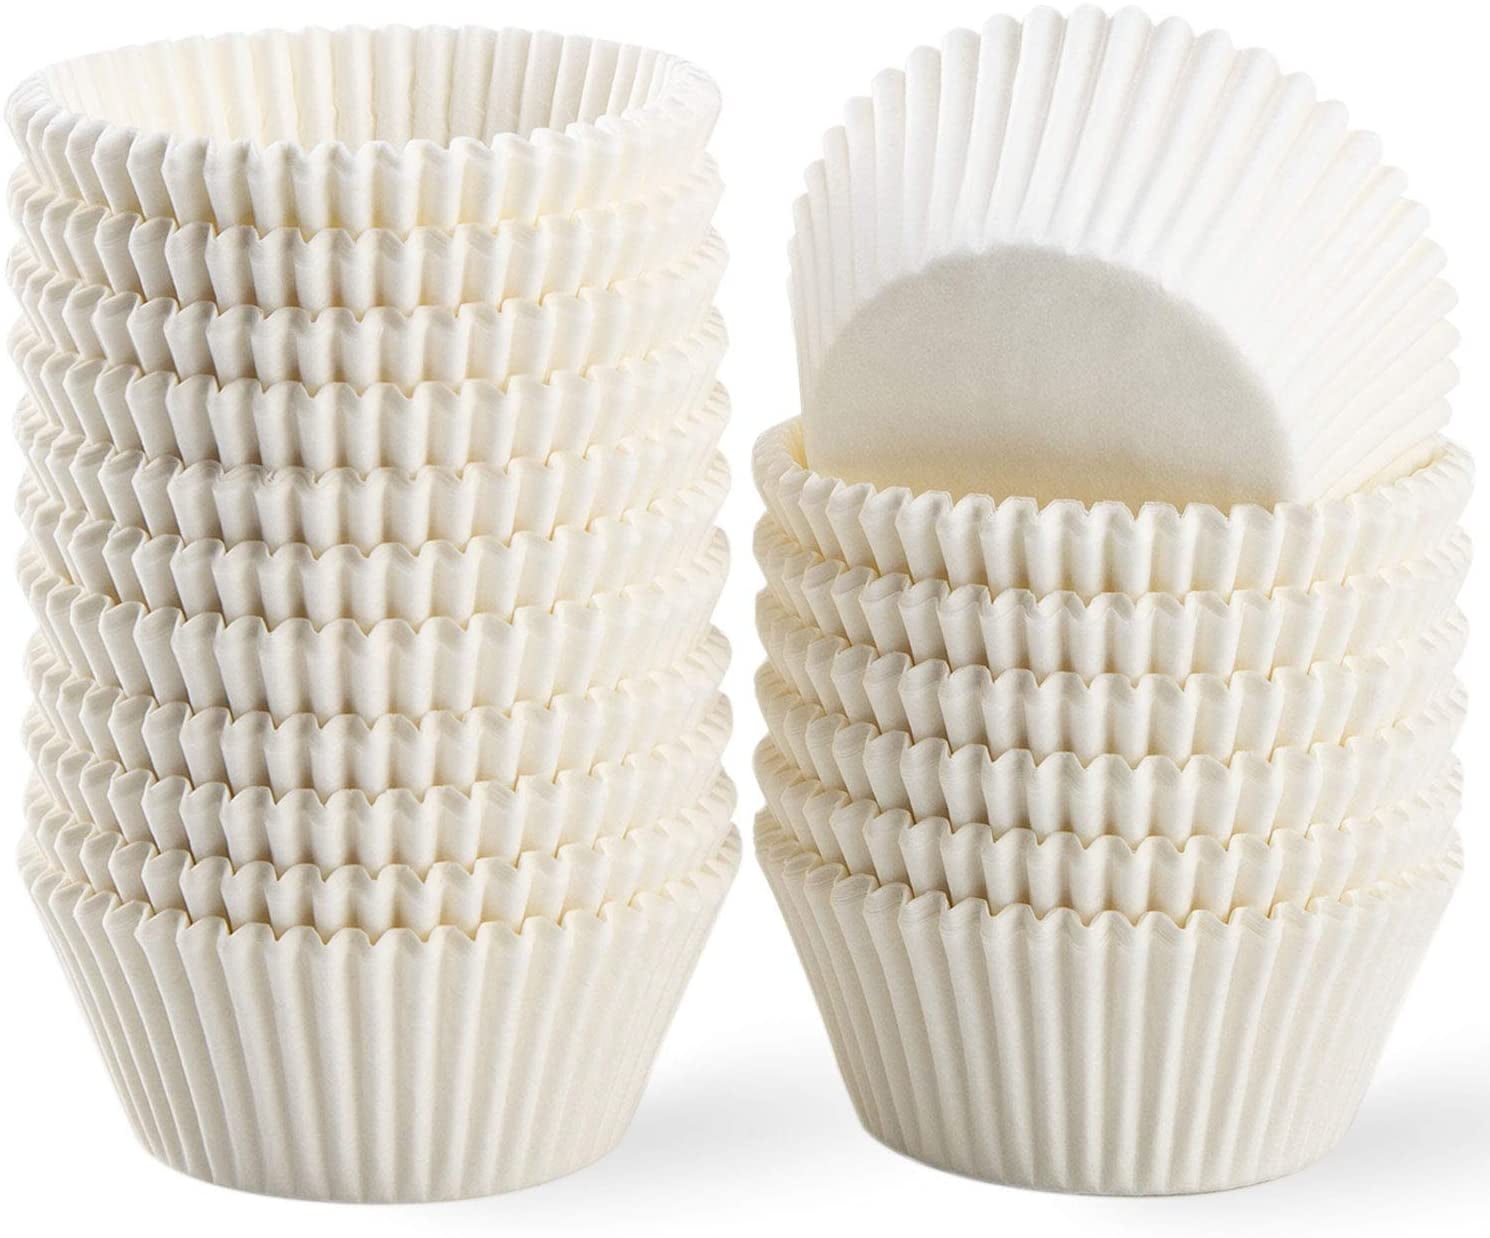 Bottom Dia 2.3 Inch 50-Pack Muffin Cups Baking Paper Cup Cupcake Muffins Liners Red and White Stripes Baking Cups 